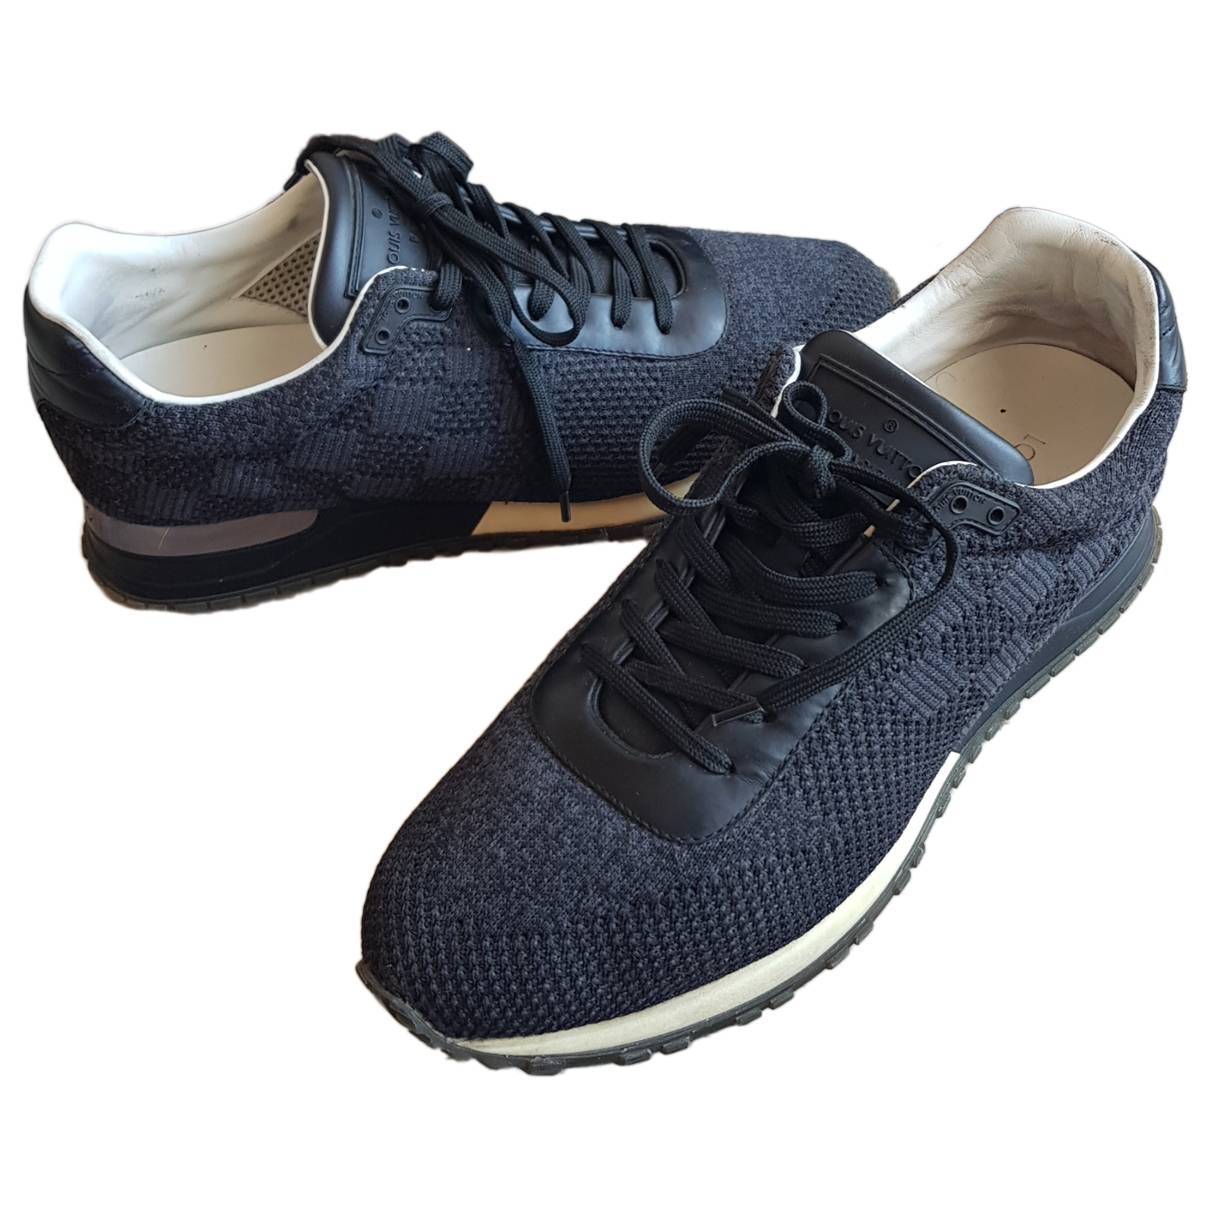 Lv runner active cloth low trainers Louis Vuitton Blue size 8.5 UK